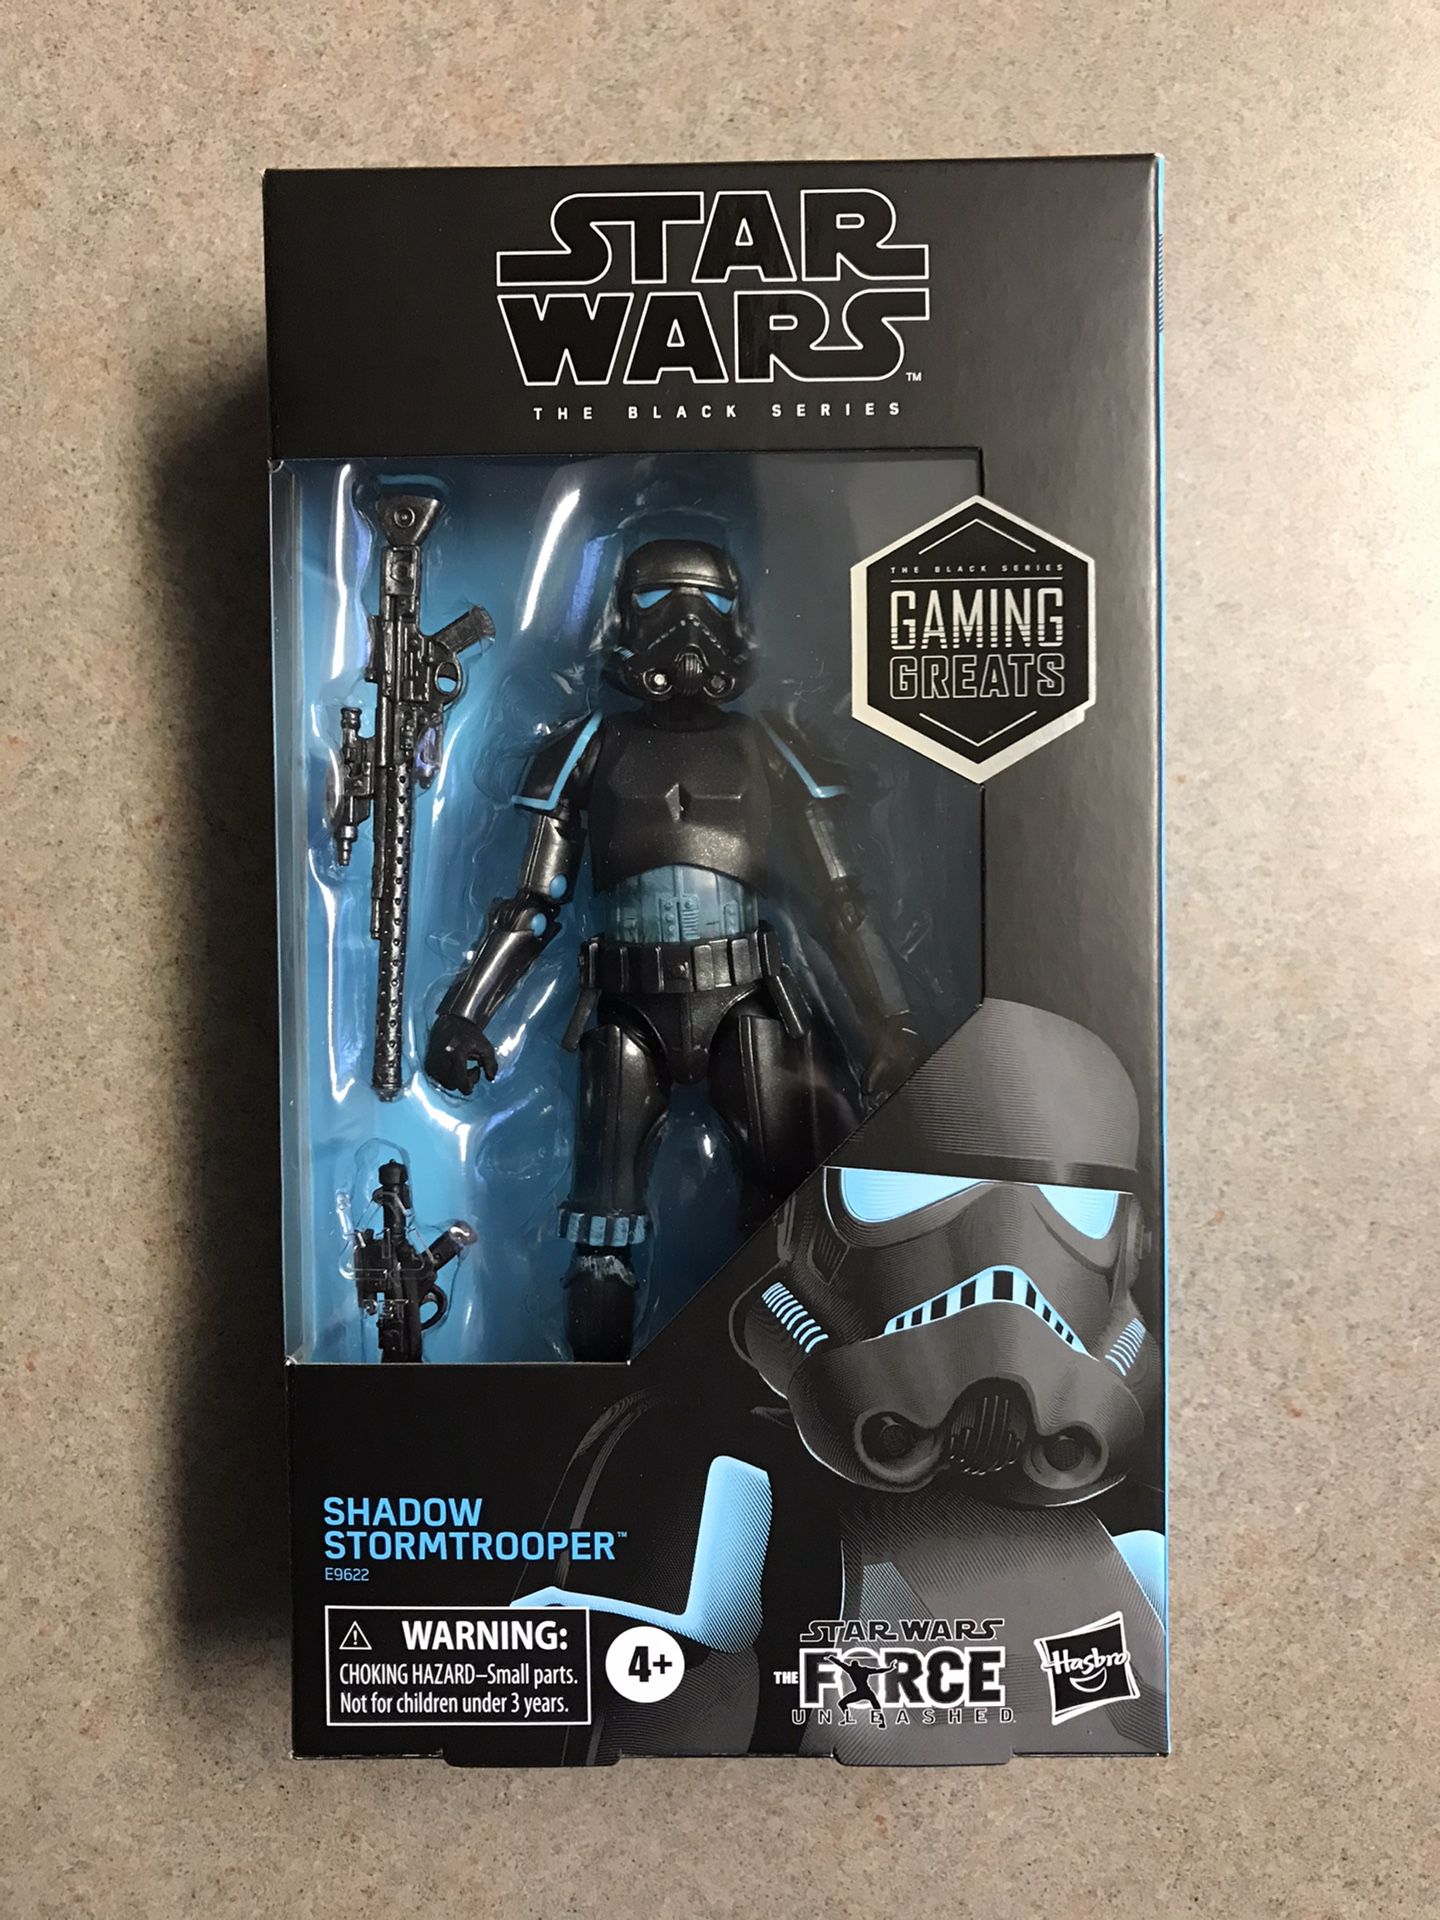 Shadow Stormtrooper Black Series Star Wars GameStop Exclusive Gaming Greats *BRAND NEW SEALED* Action Figure Collectible E9622 Hasbro Disney